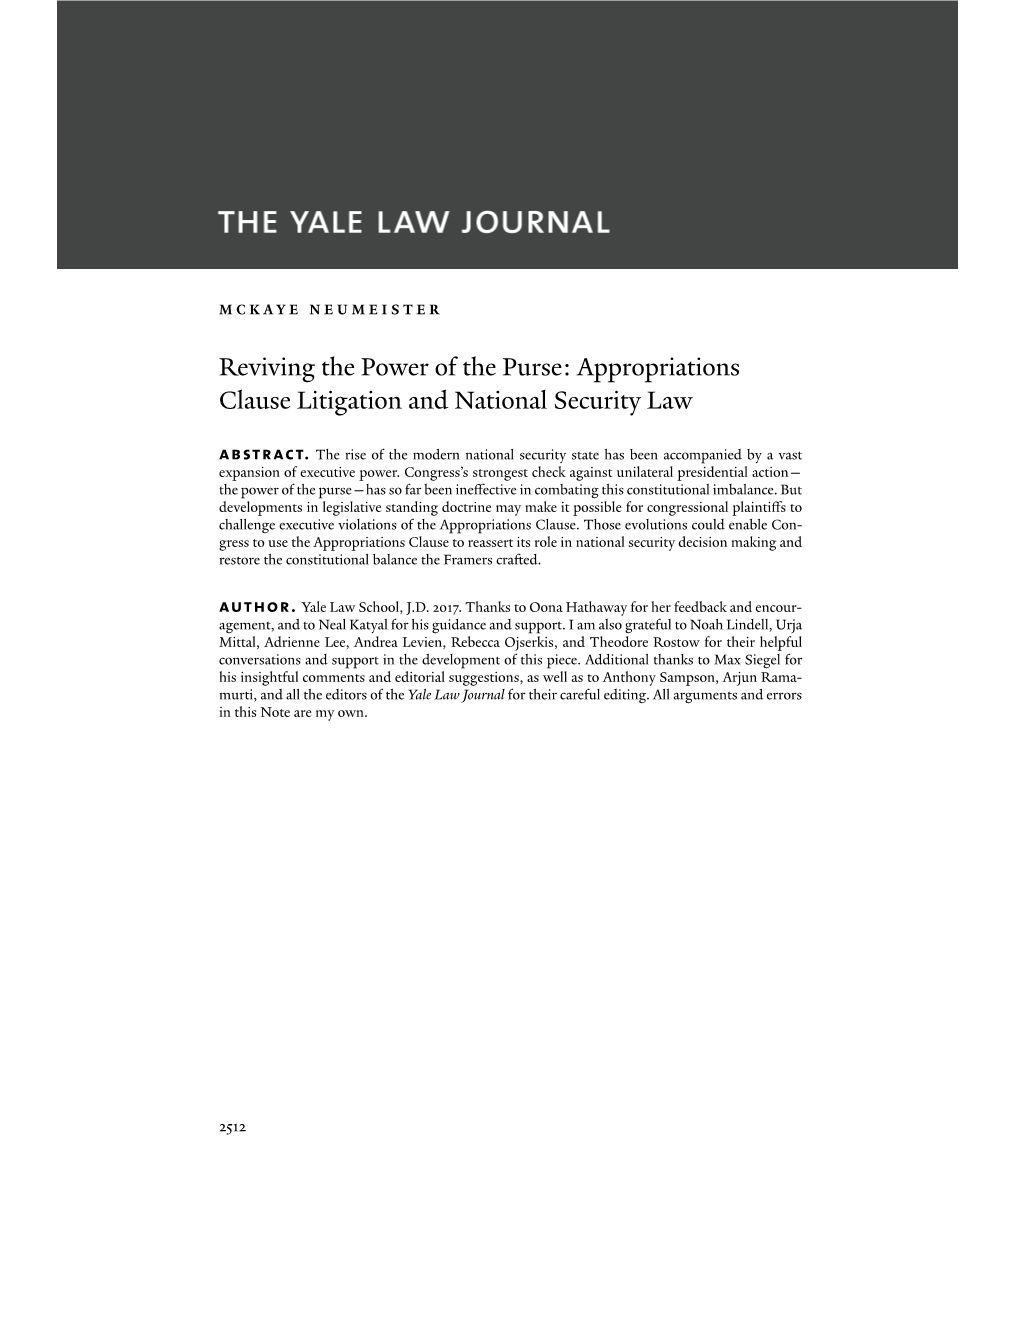 Reviving the Power of the Purse: Appropriations Clause Litigation and National Security Law Abstract